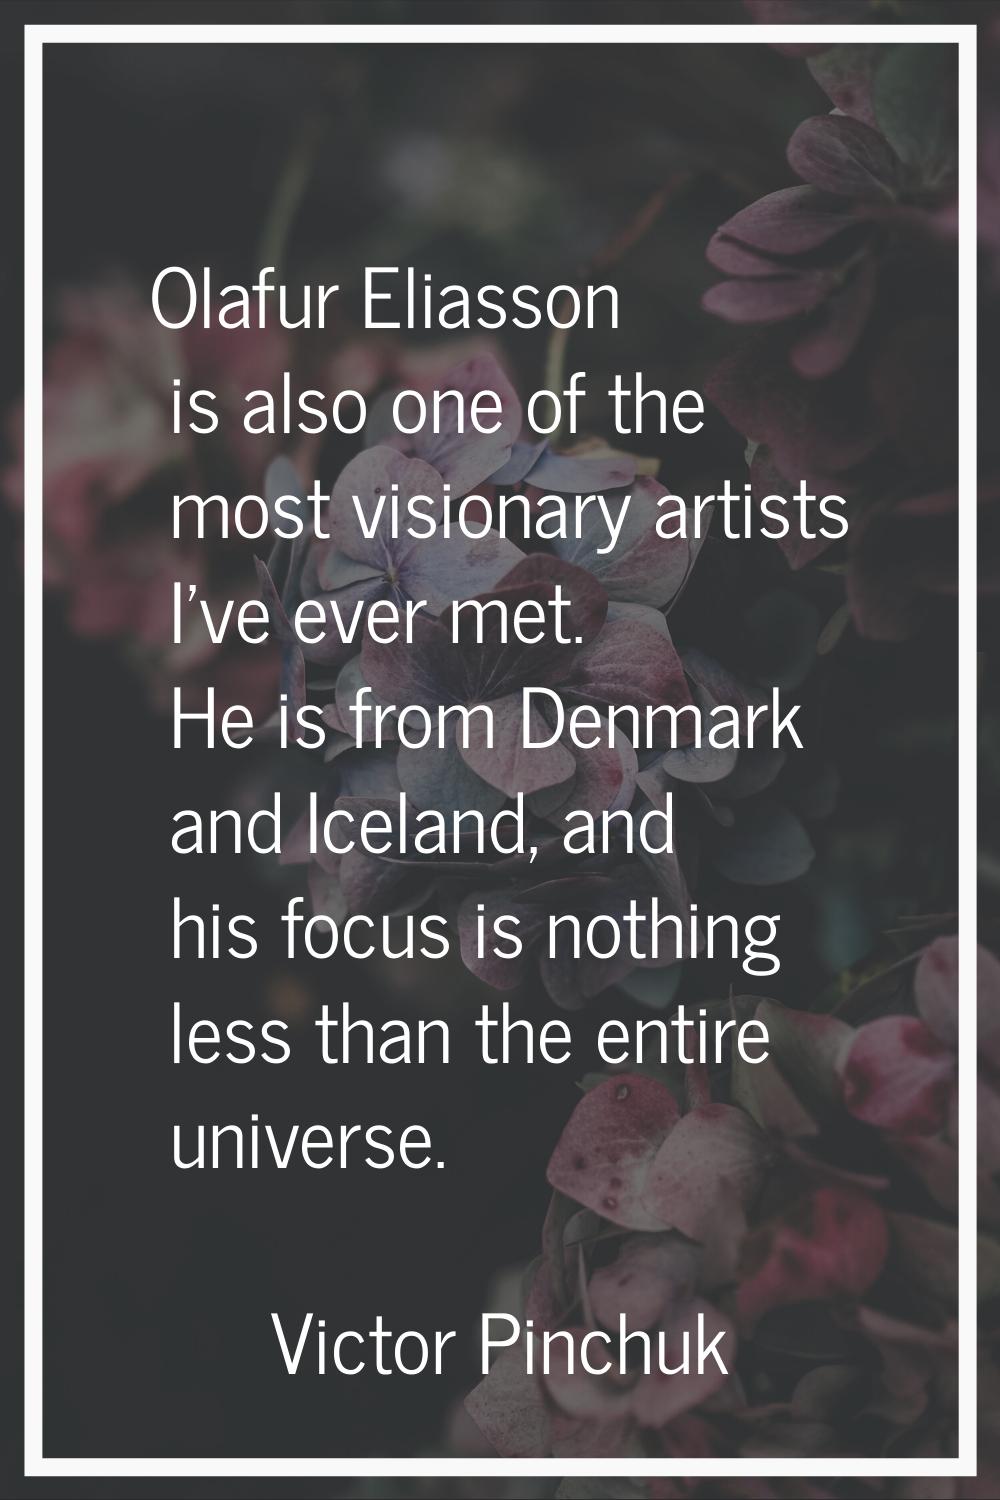 Olafur Eliasson is also one of the most visionary artists I've ever met. He is from Denmark and Ice